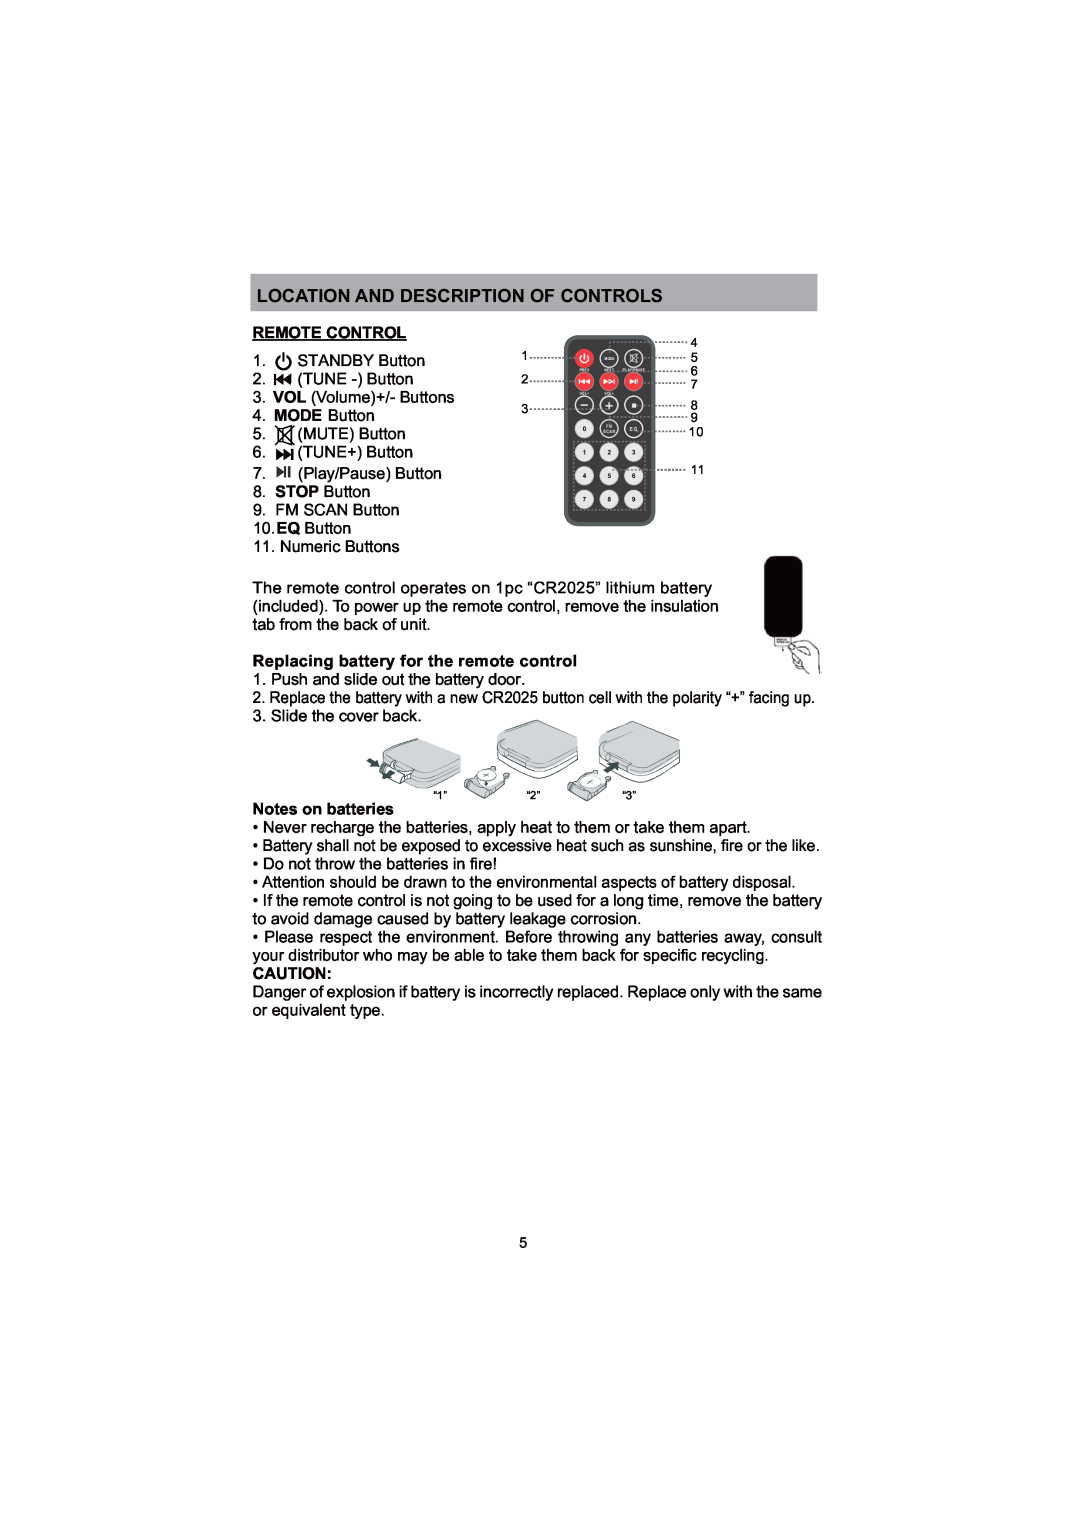 ProScan PSP288-PL Location And Description Of Controls, Remote Control, Replacing battery for the remote control 